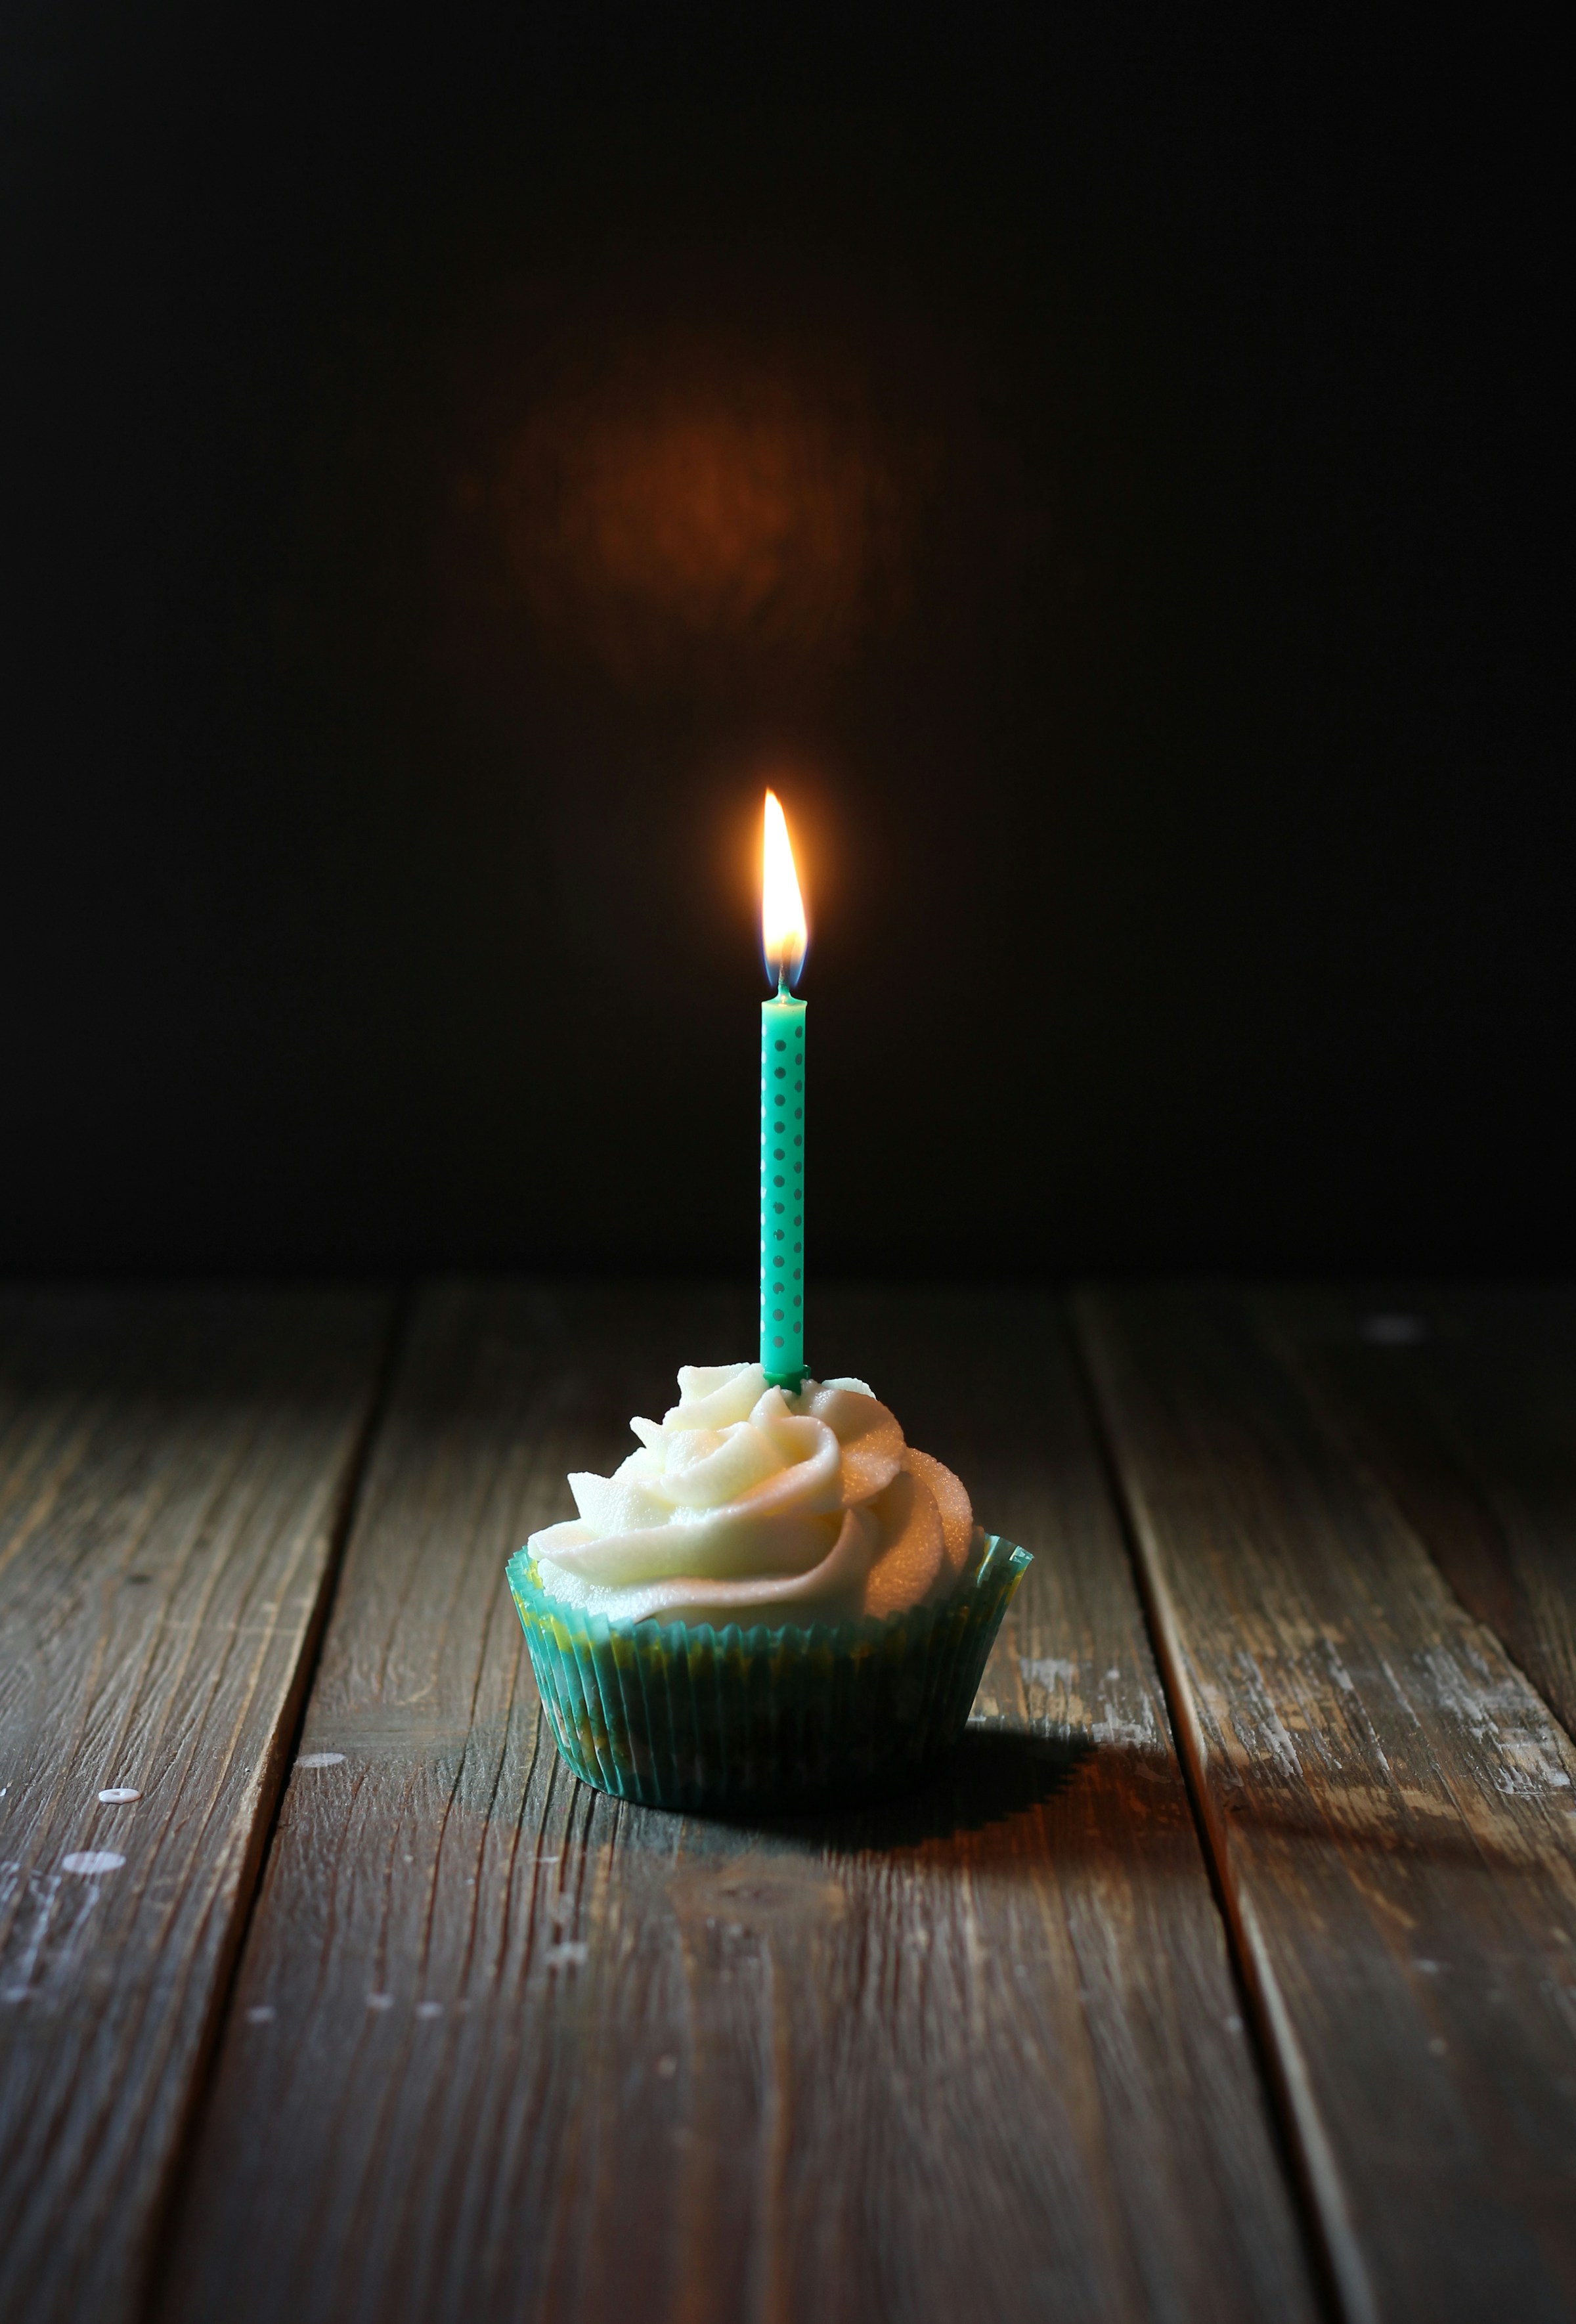 A cupcake with a candle | Source: Unsplash